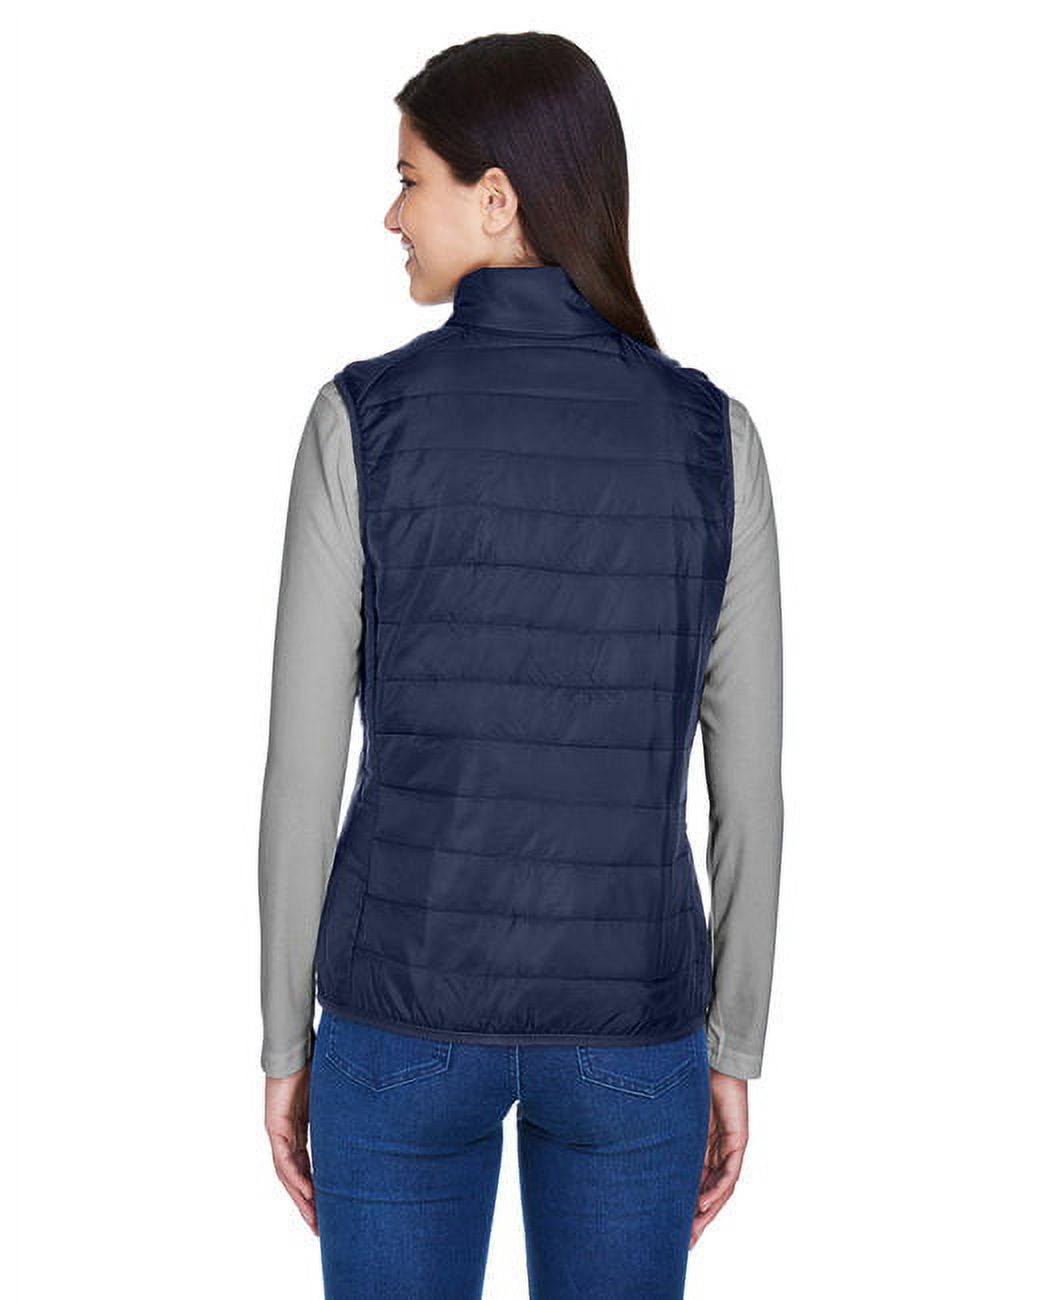 Core 365 CE702W Ladies Prevail Packable Puffer Vest - image 2 of 3